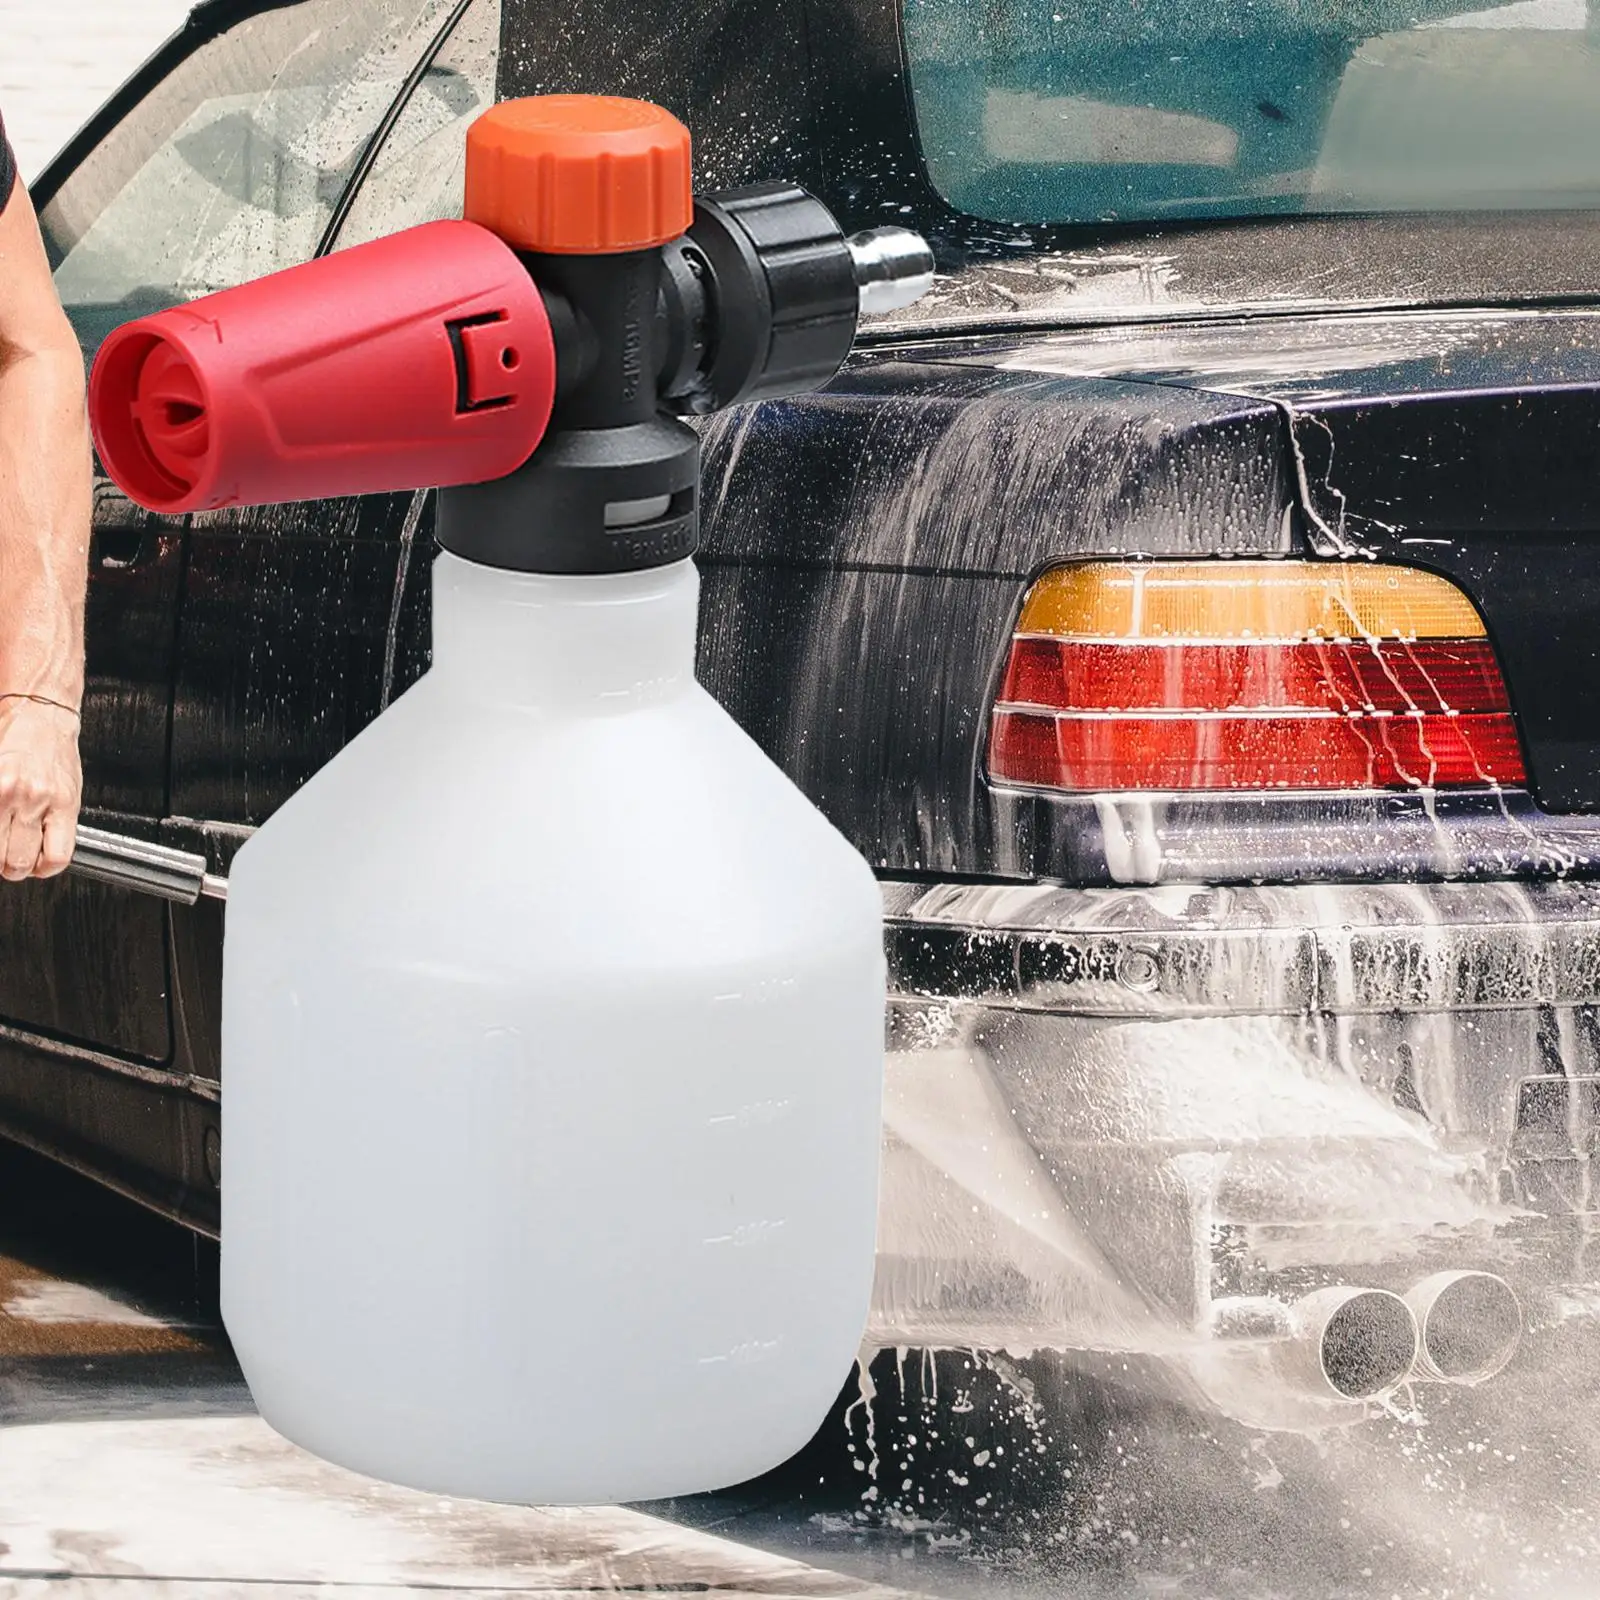 Portable Car Hand Pump Pressure Foam Sprayer Handheld for Home Cleaning